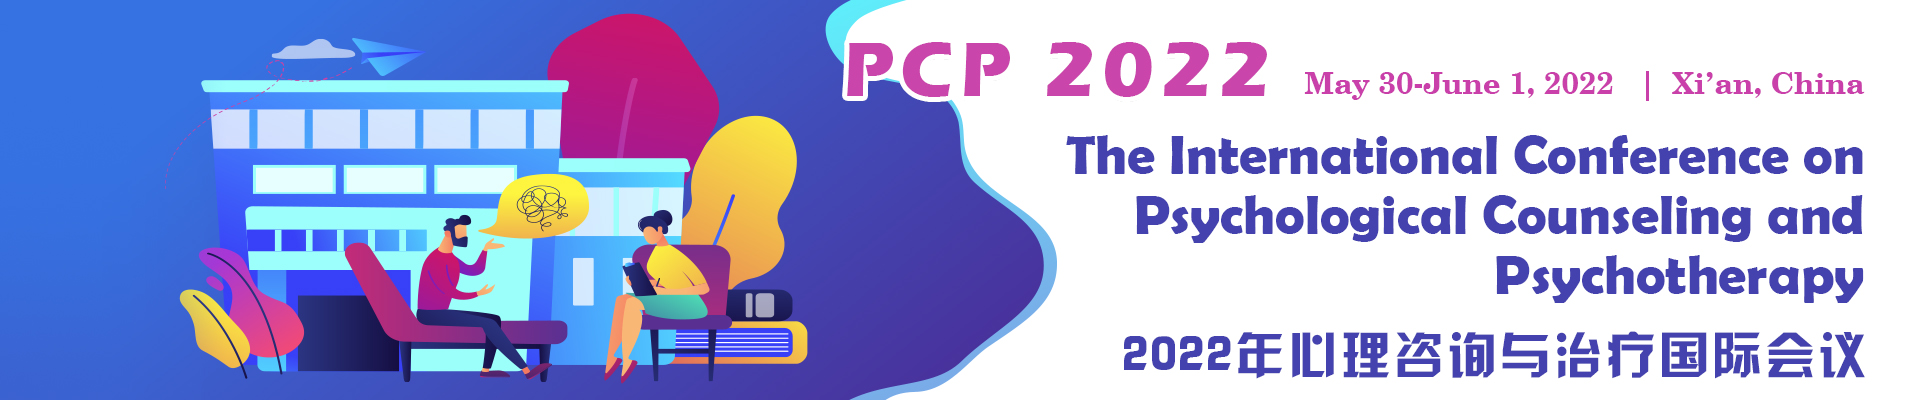 The International Conference on Psychological Counseling and Psychotherapy (PCP 2022)